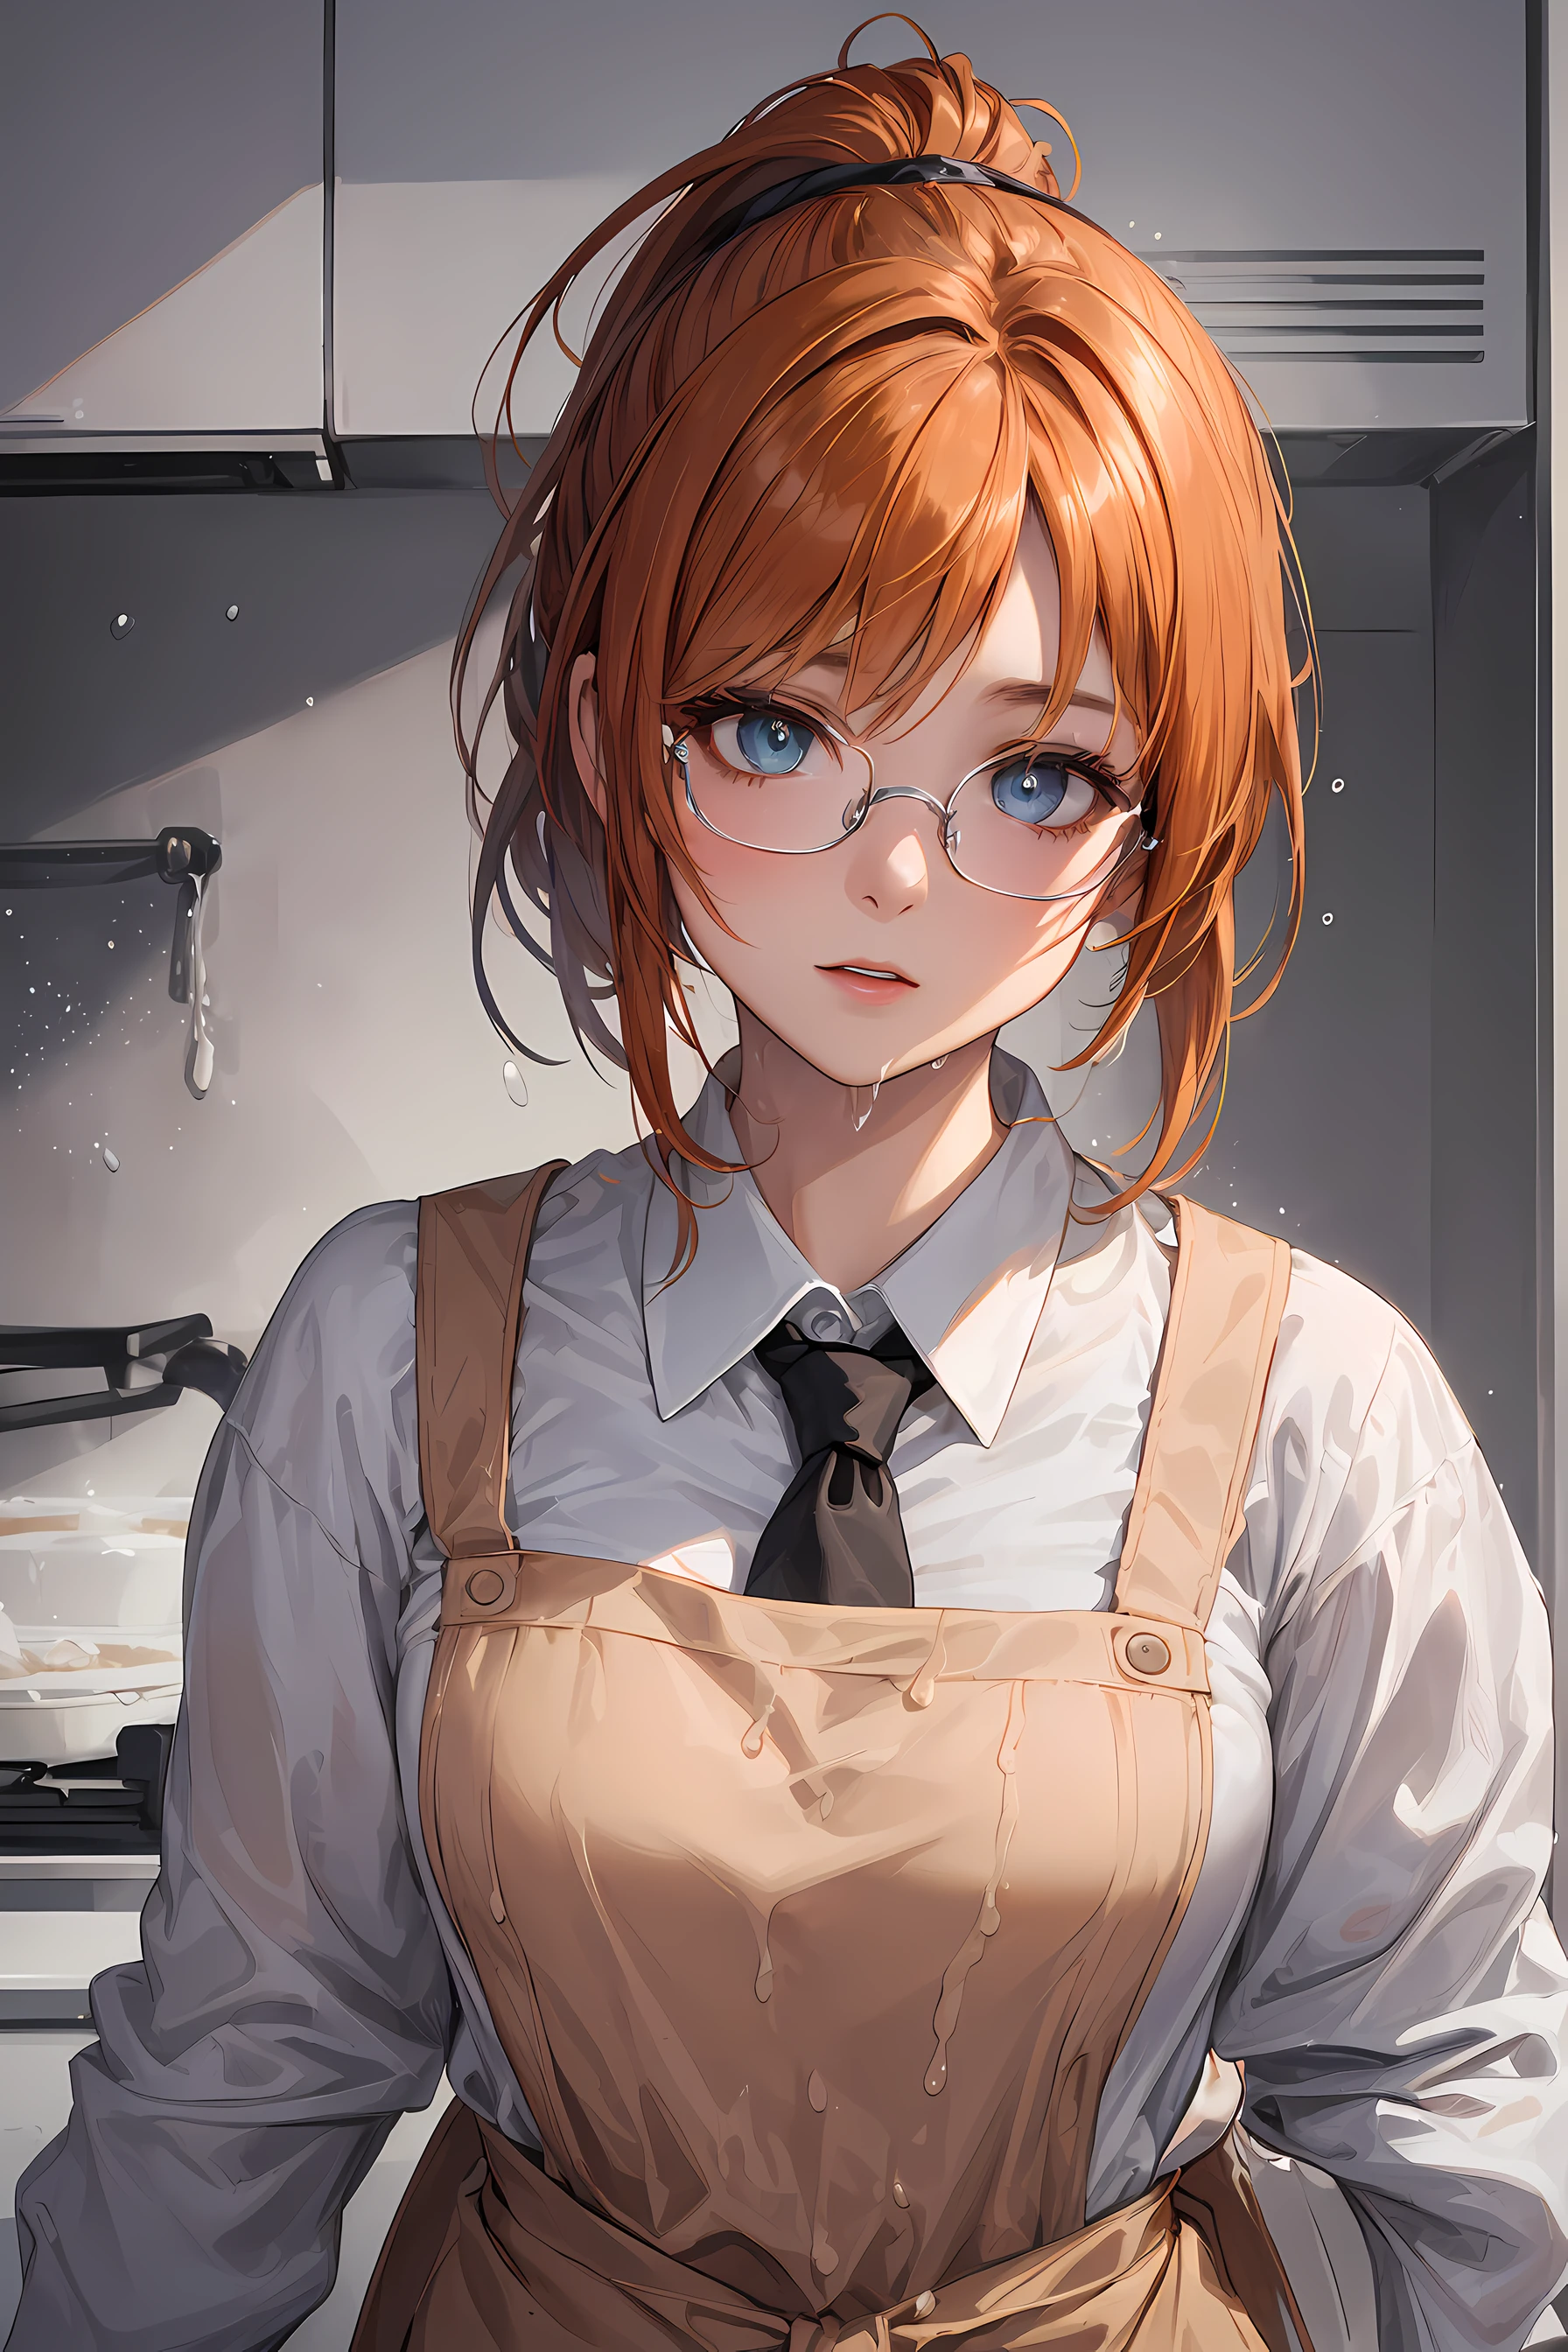 (1glasses girl:1.3, solo), (baking cooker:1.3), (a extremely pretty and beautiful Japanese woman), (sexy girl), (professional sexy attire:1.3), (22 years old: 1.1), (baking in the kitchen:1.3), (spills powder:1.3), (splashes of powder:1.3), (panic expression:1.3), (confused:1.3), (panic situation:1.3), (attractive random posing: 1.3), (in the baker kitchen:1.3), ((splash playing white powders background:1.5)), BREAK, (ponytail:1.3), (shiny-orange thin hair:1.3), bangs, dark brown eyes, beautiful eyes, princess eyes, (big eyes:1.3), (wearing a glasses:1.3), Hair between eyes, (shortt hair :1.3), (slender:1.1), (small-medium-breasts:0.95), (thin waist: 1.15), (detailed beautiful girl: 1.4), Parted lips, Red lips, full-make-up face, (shiny skin), ((Perfect Female Body)), (Upper Body Image:1.3), Perfect Anatomy, Perfect Proportions, (most beautiful Korean actress face:1.3, extremely cute and beautiful Japanese actress face:1.3), BREAK, (View viewer, wearing a school girl uniform, (insanely detailed collared shirt:1.3, long-sleeve:1.3), (blue tie:1.3), (dark-green box-skirt:1.3), (green apron:1.3), (black enamel booties:1.3), detailed clothes, BREAK, (detailed simple baker kitchen background:1.3), (kitchen, baking setup), (Studio soft lighting: 1.3), (fake lights: 1.3), (backlight: 1.3), BREAK, (Realistic, Photorealistic: 1.37), (Masterpiece, Best Quality: 1.2), (Ultra High Resolution: 1.2), (RAW Photo: 1.2), (Sharp Focus: 1.3), (Face Focus: 1.2), (Ultra Detailed CG Unified 8k Wallpaper: 1.2), (Beautiful Skin: 1.2), (pale Skin: 1.3), (Hyper Sharp Focus: 1.5), (Ultra Sharp Focus: 1.5), (Beautiful pretty face: 1.3), (super detailed background, detail background: 1.3), Ultra Realistic Photo, Hyper Sharp Image, Hyper Detail Image, airbrush art, smooth gradients, soft transitions, fine details, photorealistic effects, versatile medium, automotive art